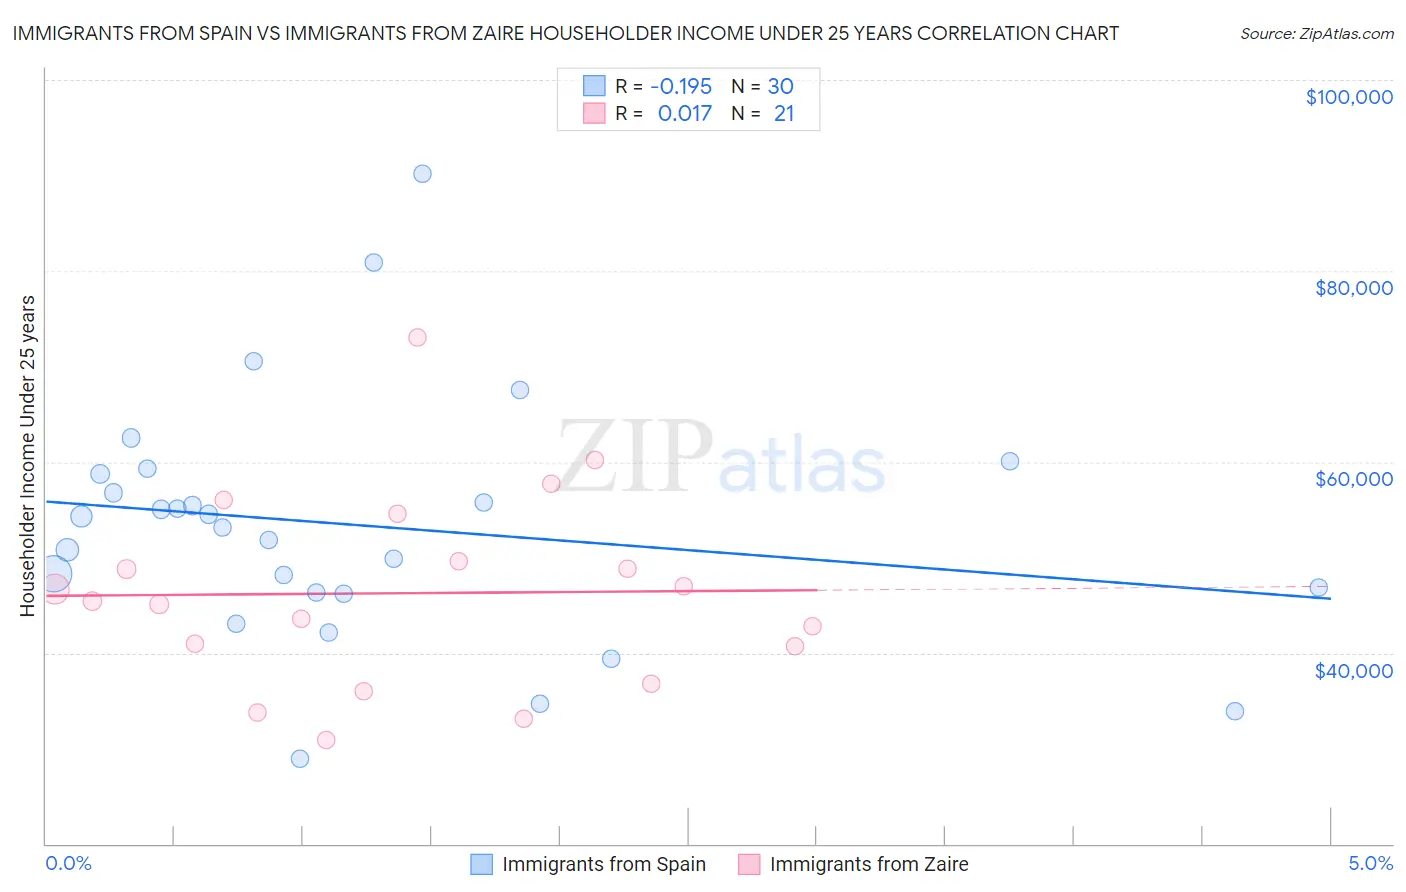 Immigrants from Spain vs Immigrants from Zaire Householder Income Under 25 years